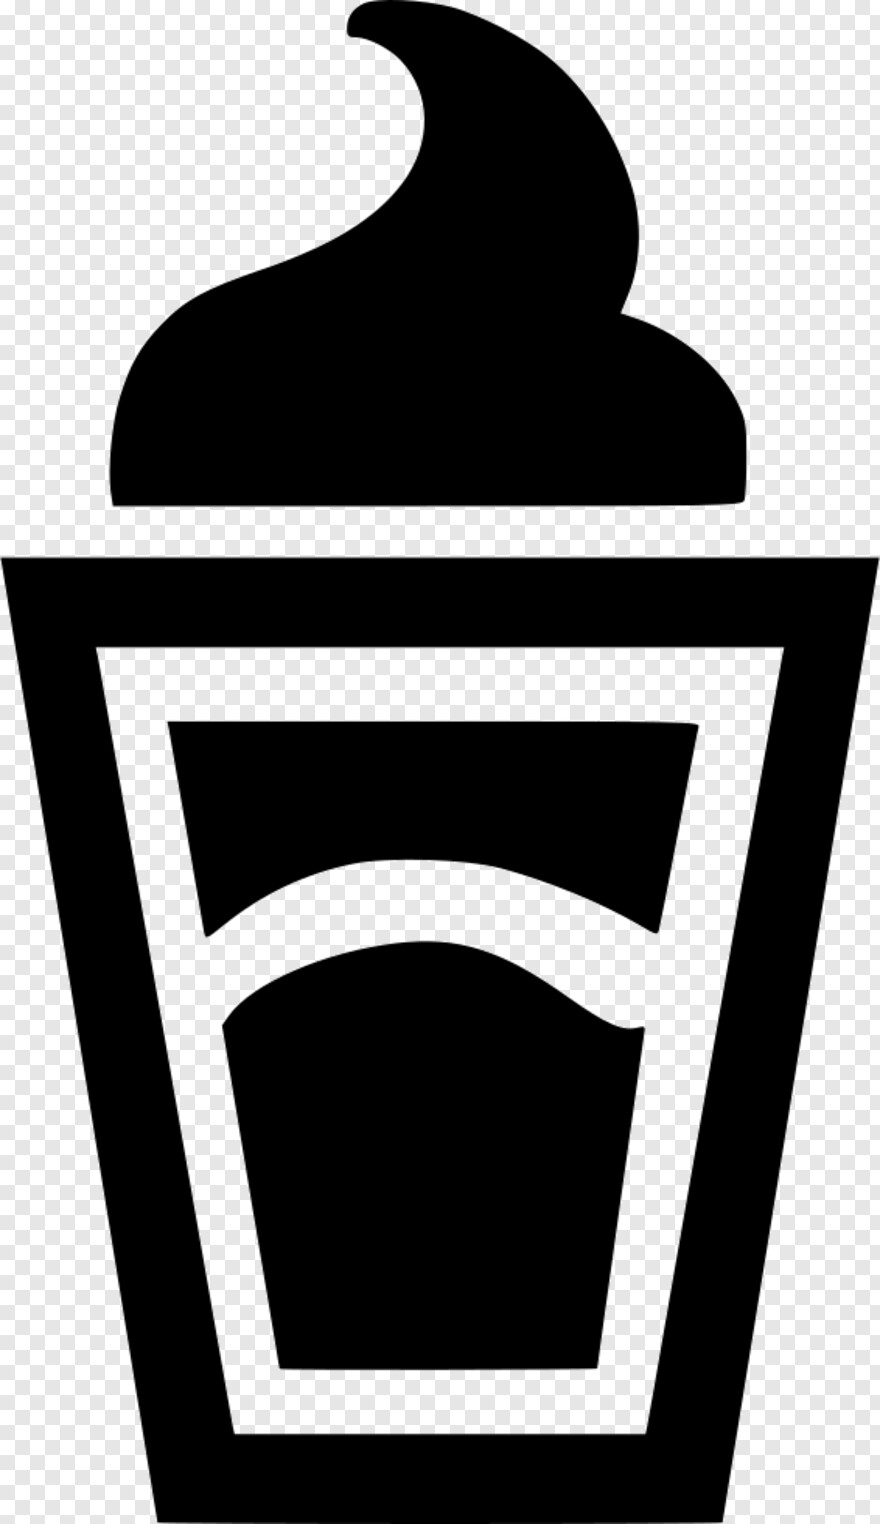 coffee-cup-silhouette # 403132